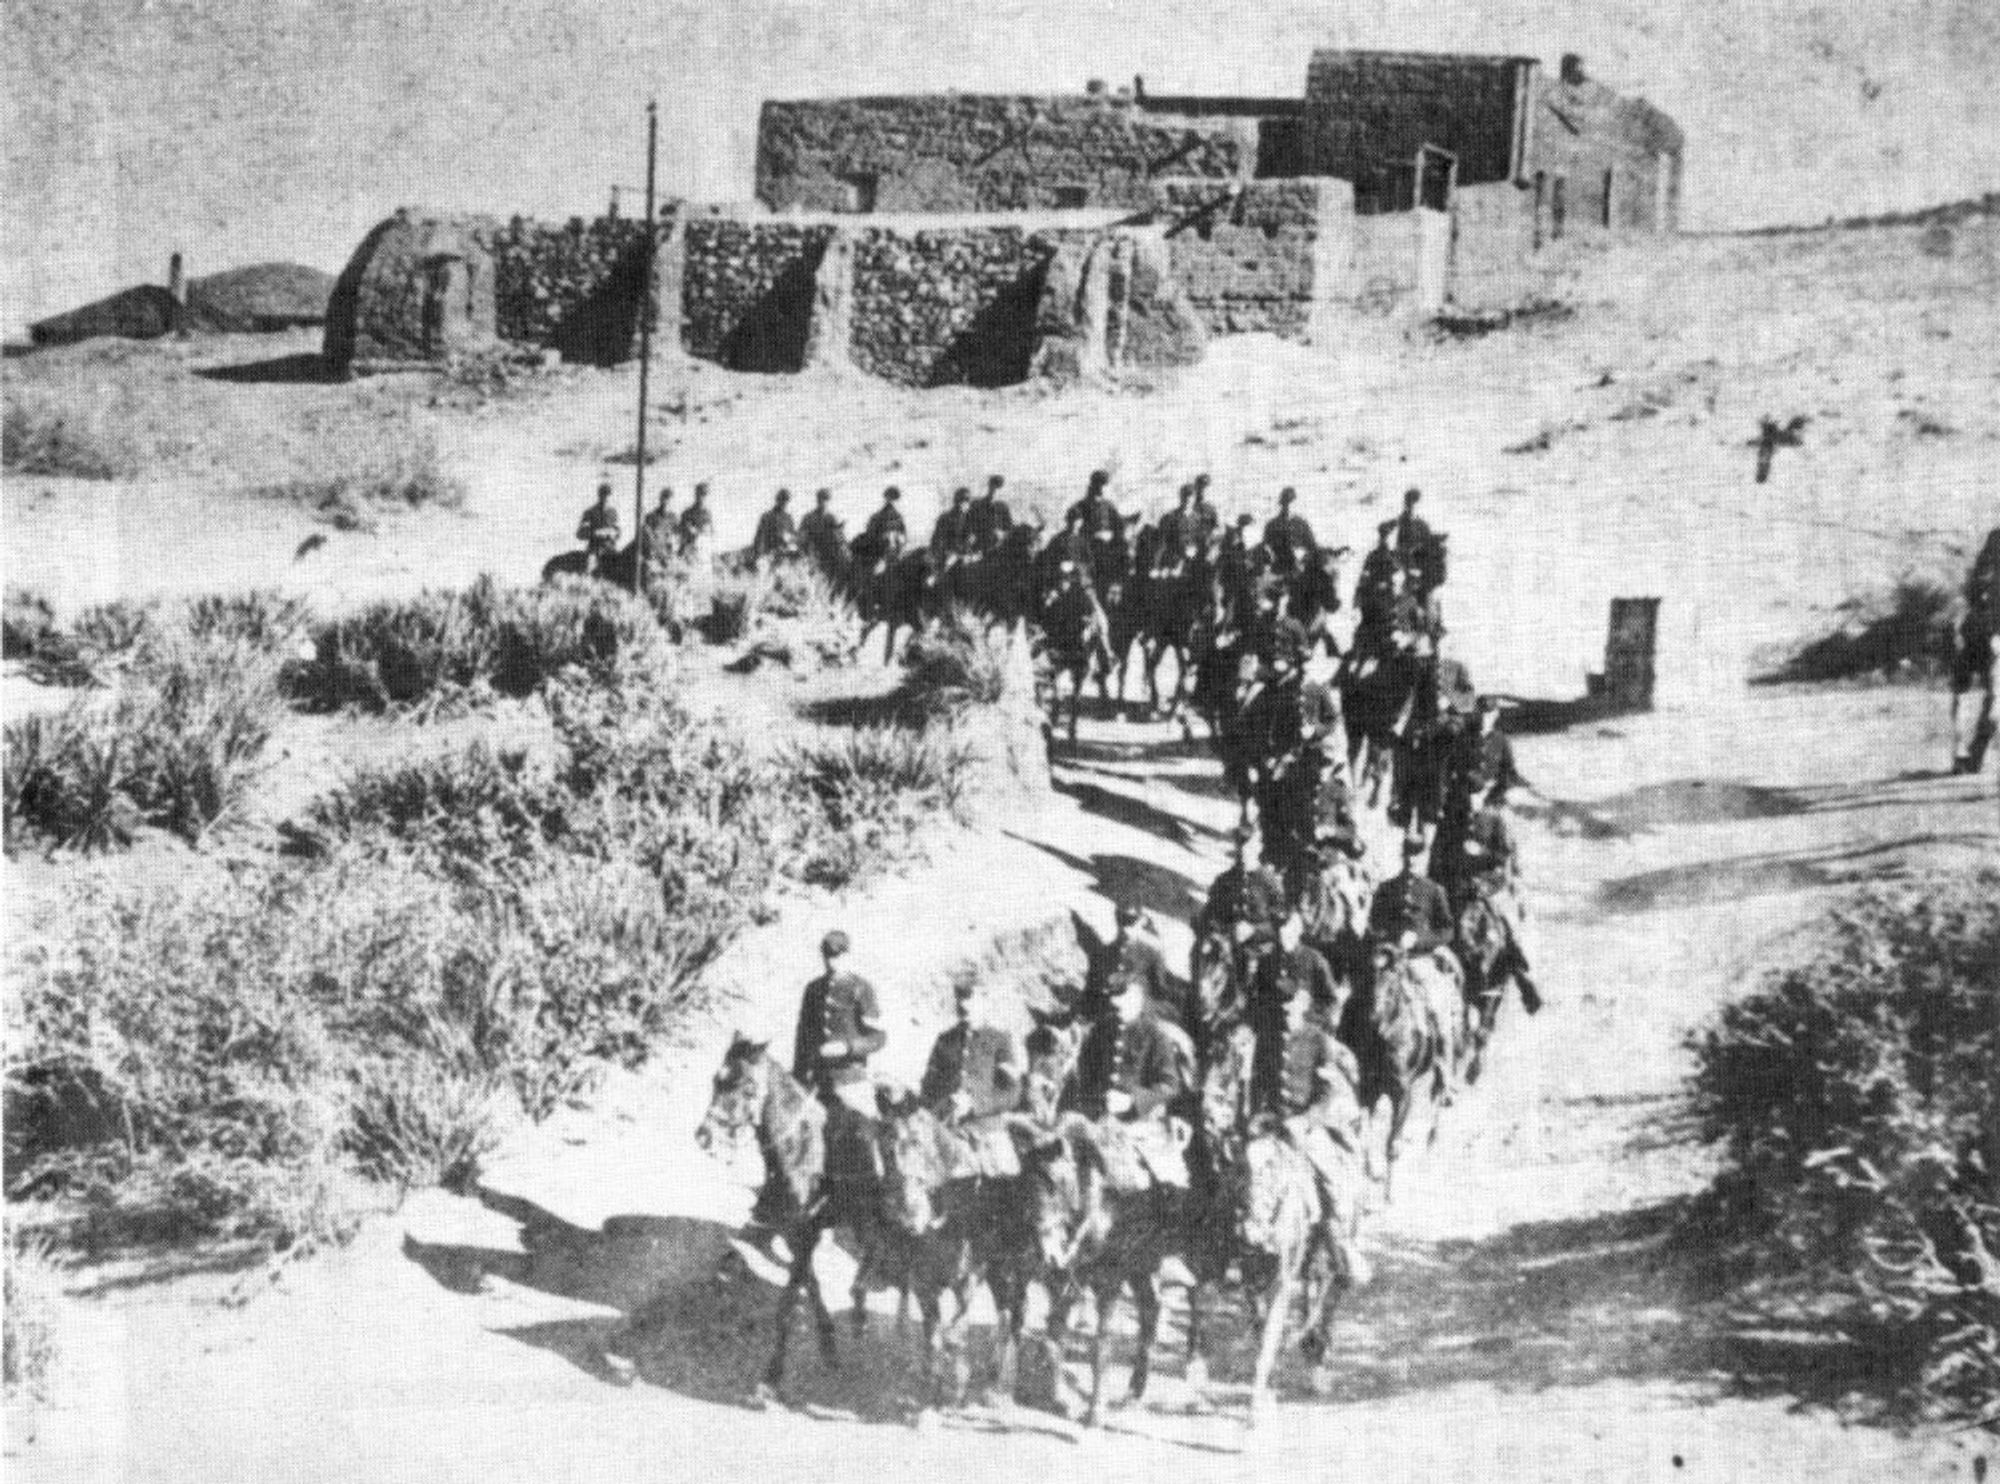 A cavalry patrol leaving Ft. Bowie.